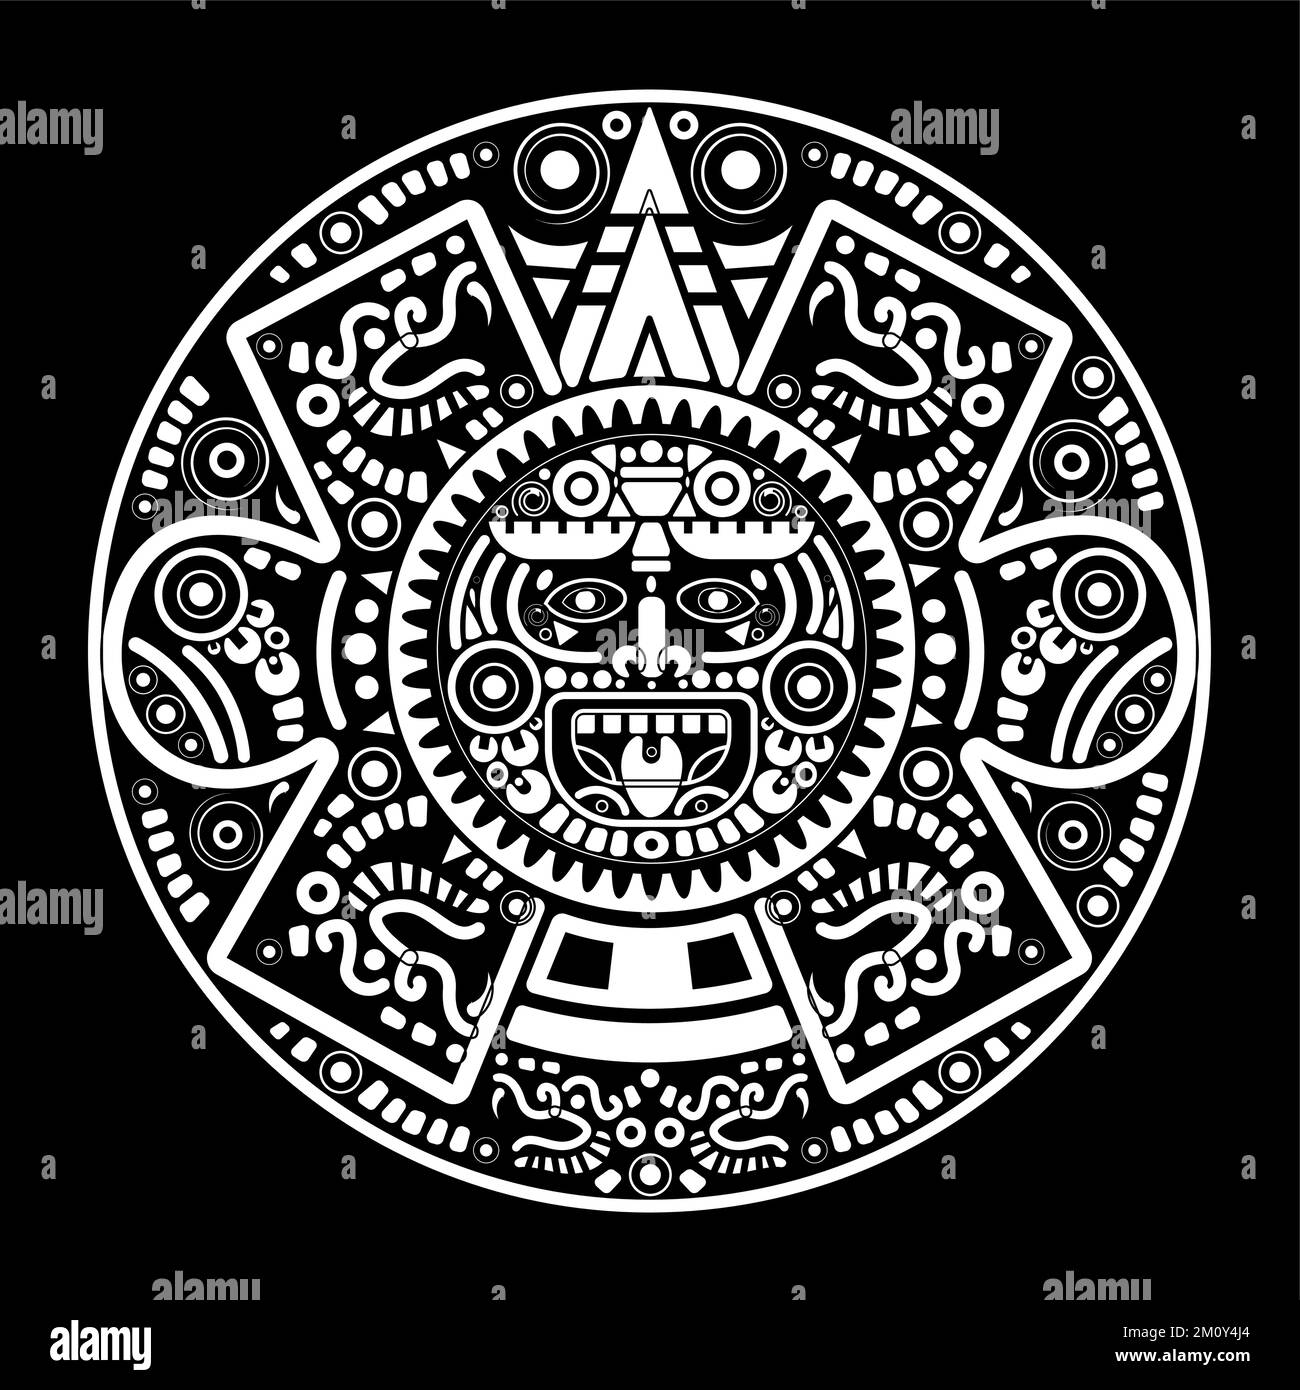 Aztec Symbols Tattoo Flash Sheet Stencil for Real Stick and Poke Tattoos -  FREE DOWNLOAD | SINGLE NEEDLE